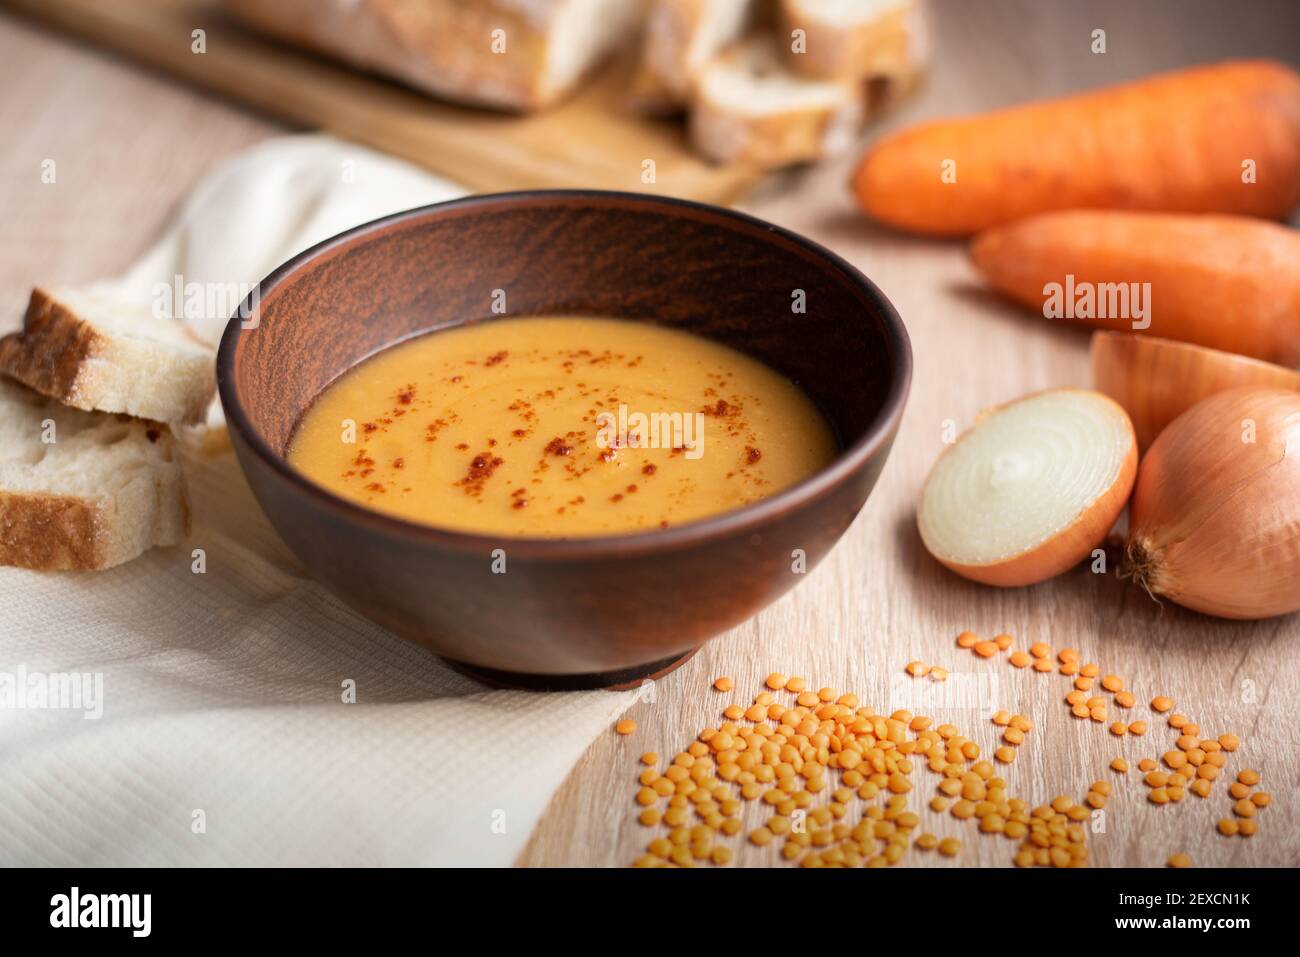 Hot delicious vegetarian red lentil cream soup with ingredients: carrot, onion, and bread on a wooden table, close up. Stock Photo